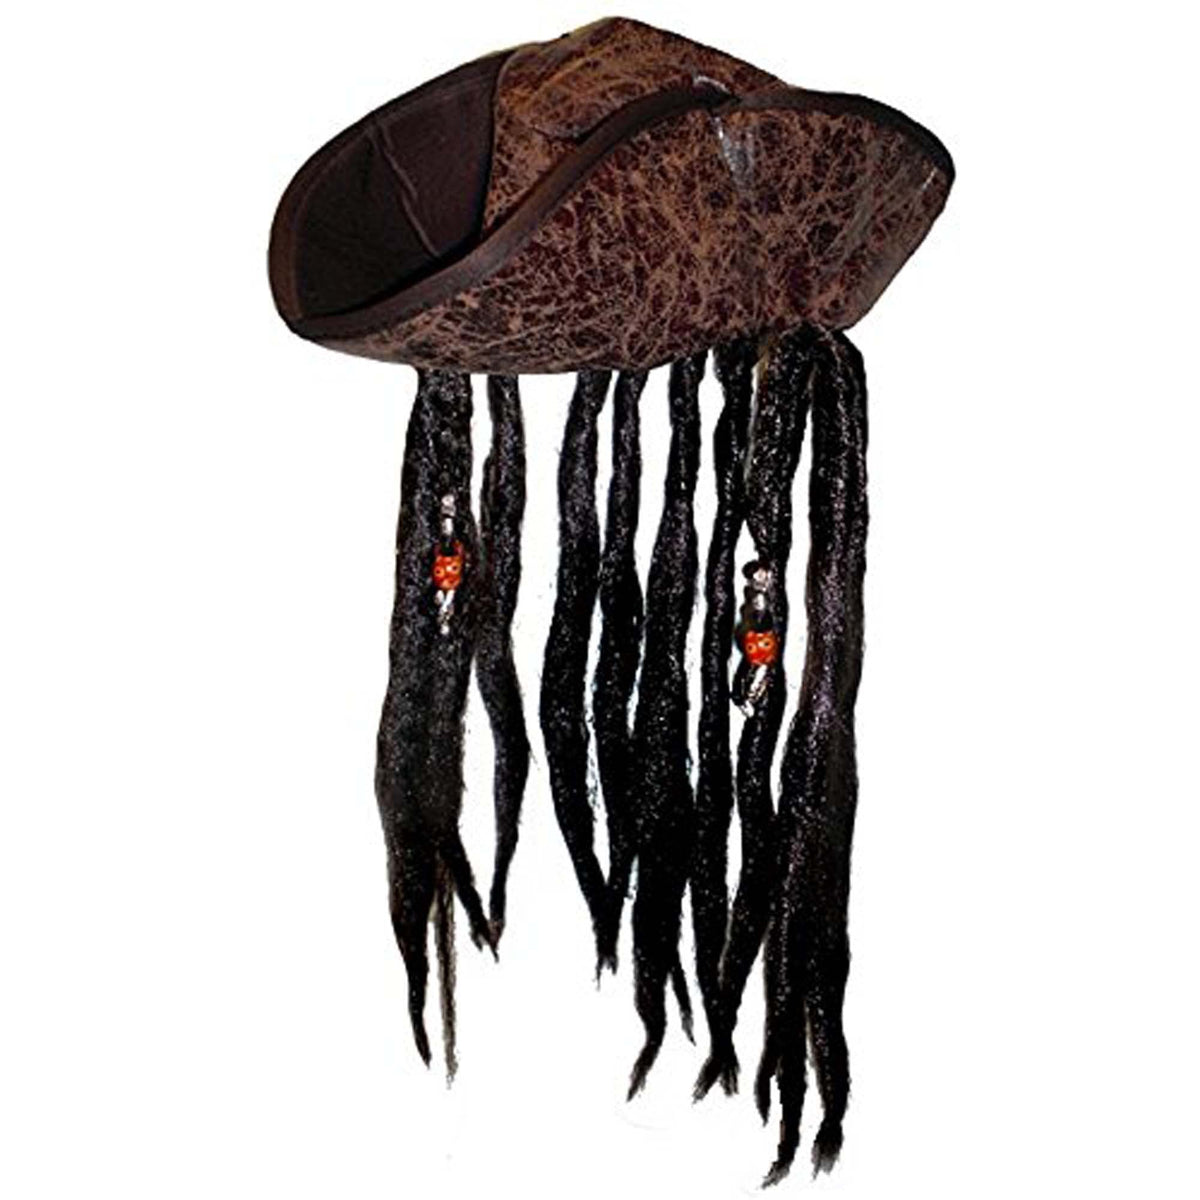 JACOBSON HAT CO INC Costume Accessories Brown Pirate Hat with Braids Costume Accessory for Adults 763285206573